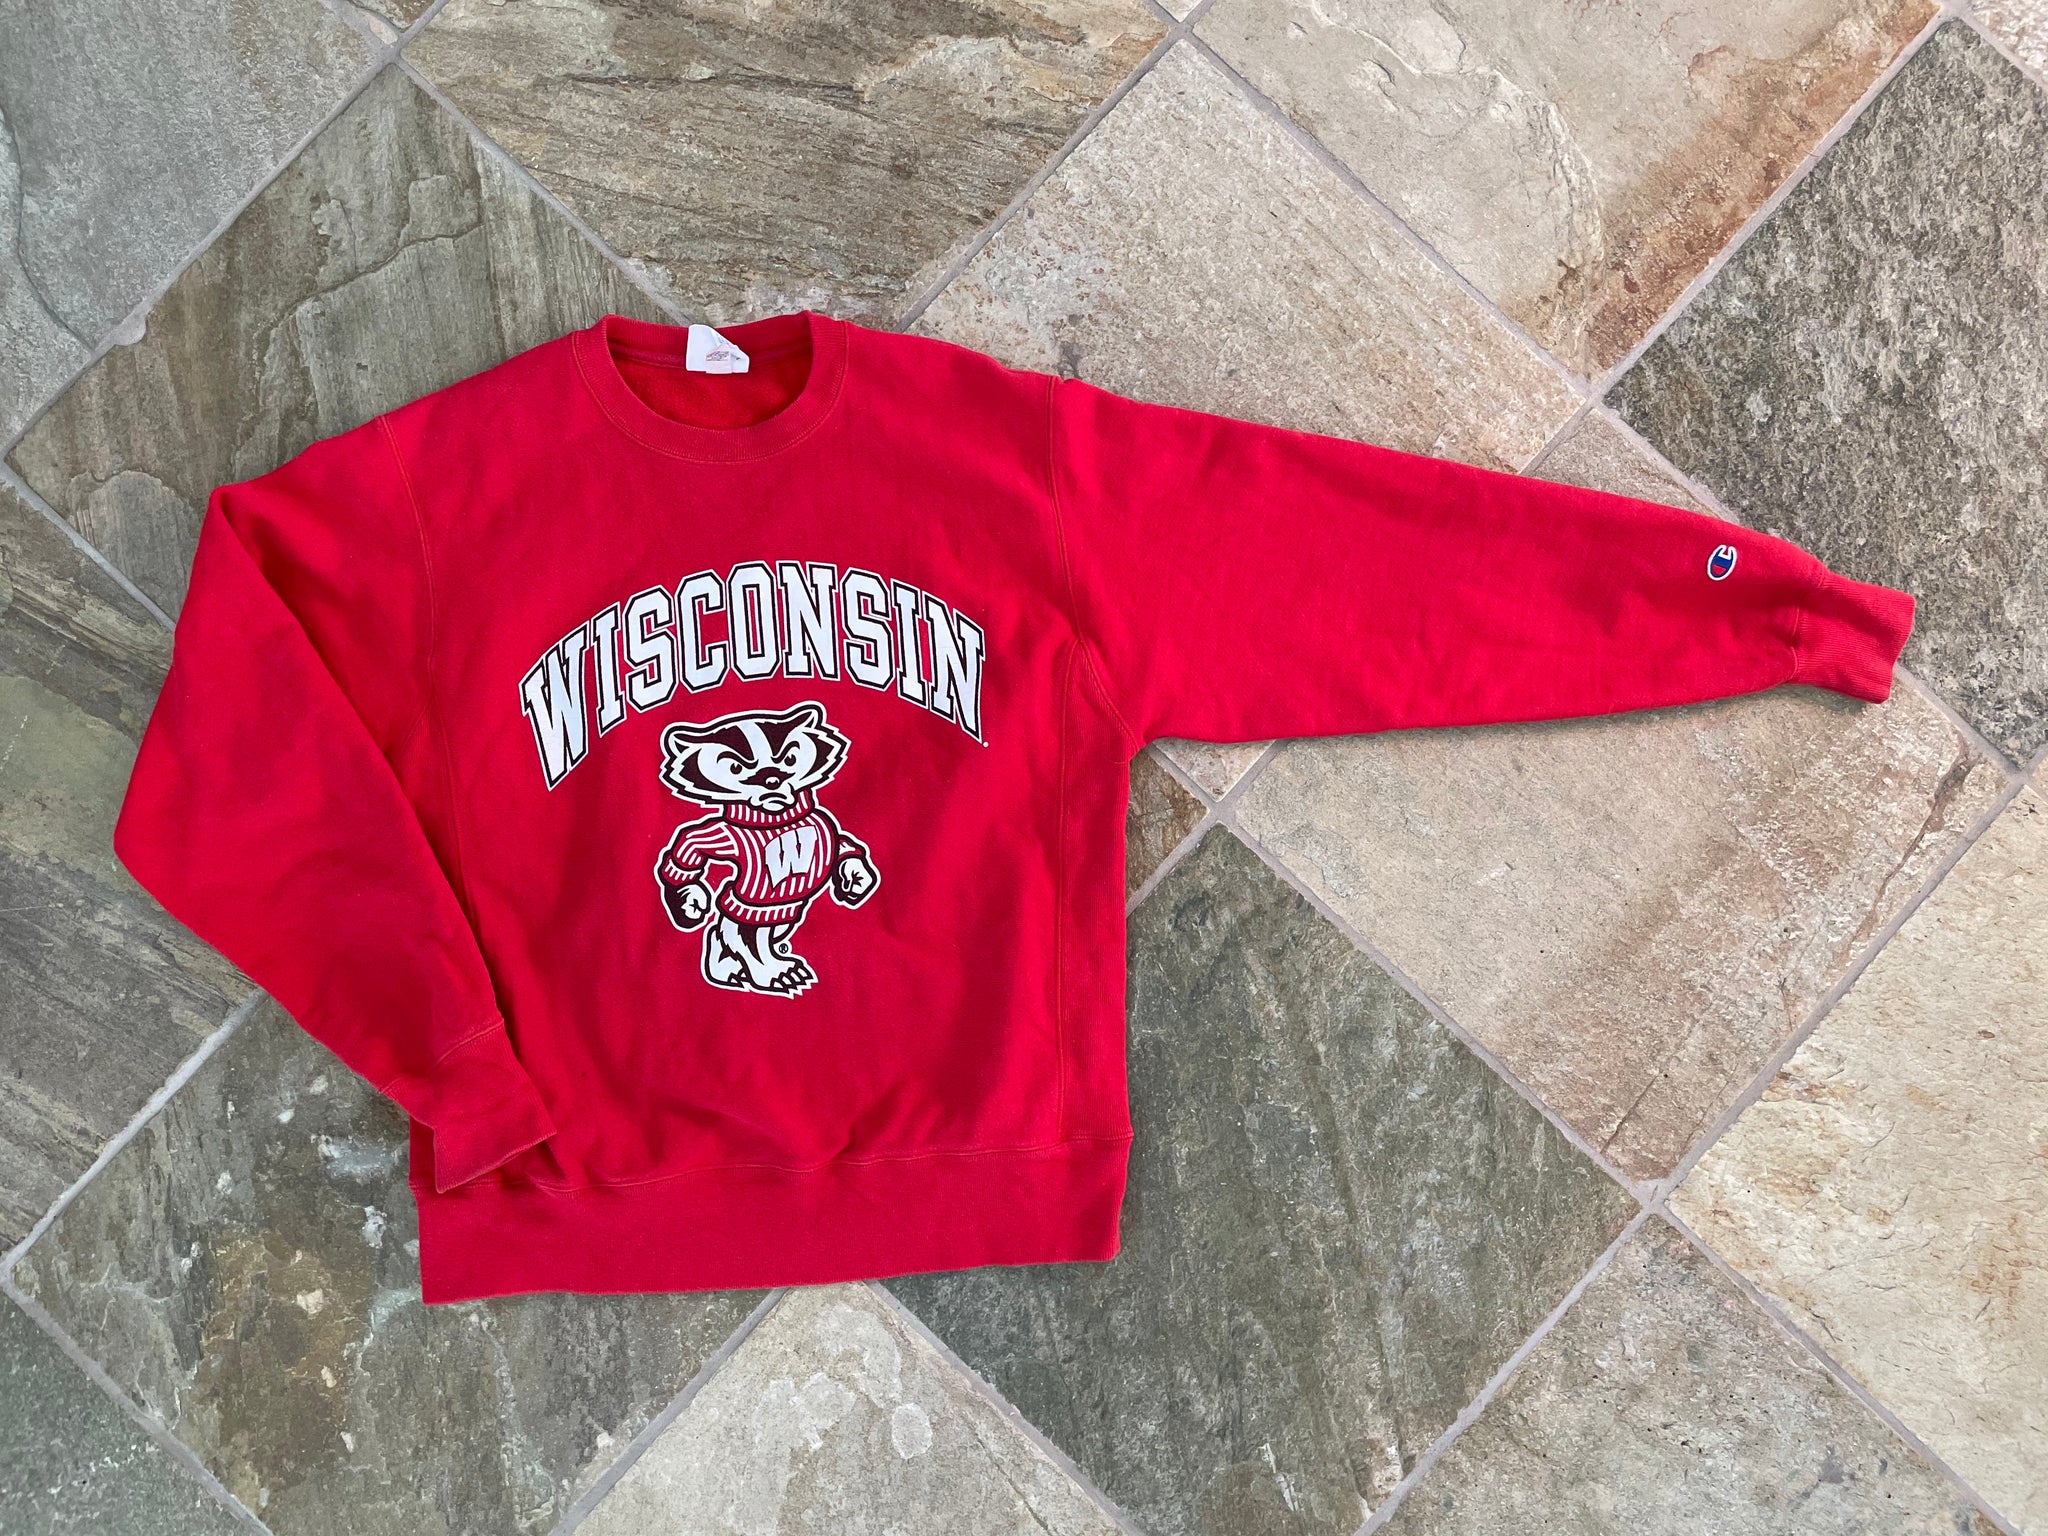 Vintage Wisconsin Badgers Champion Reverse Weave College